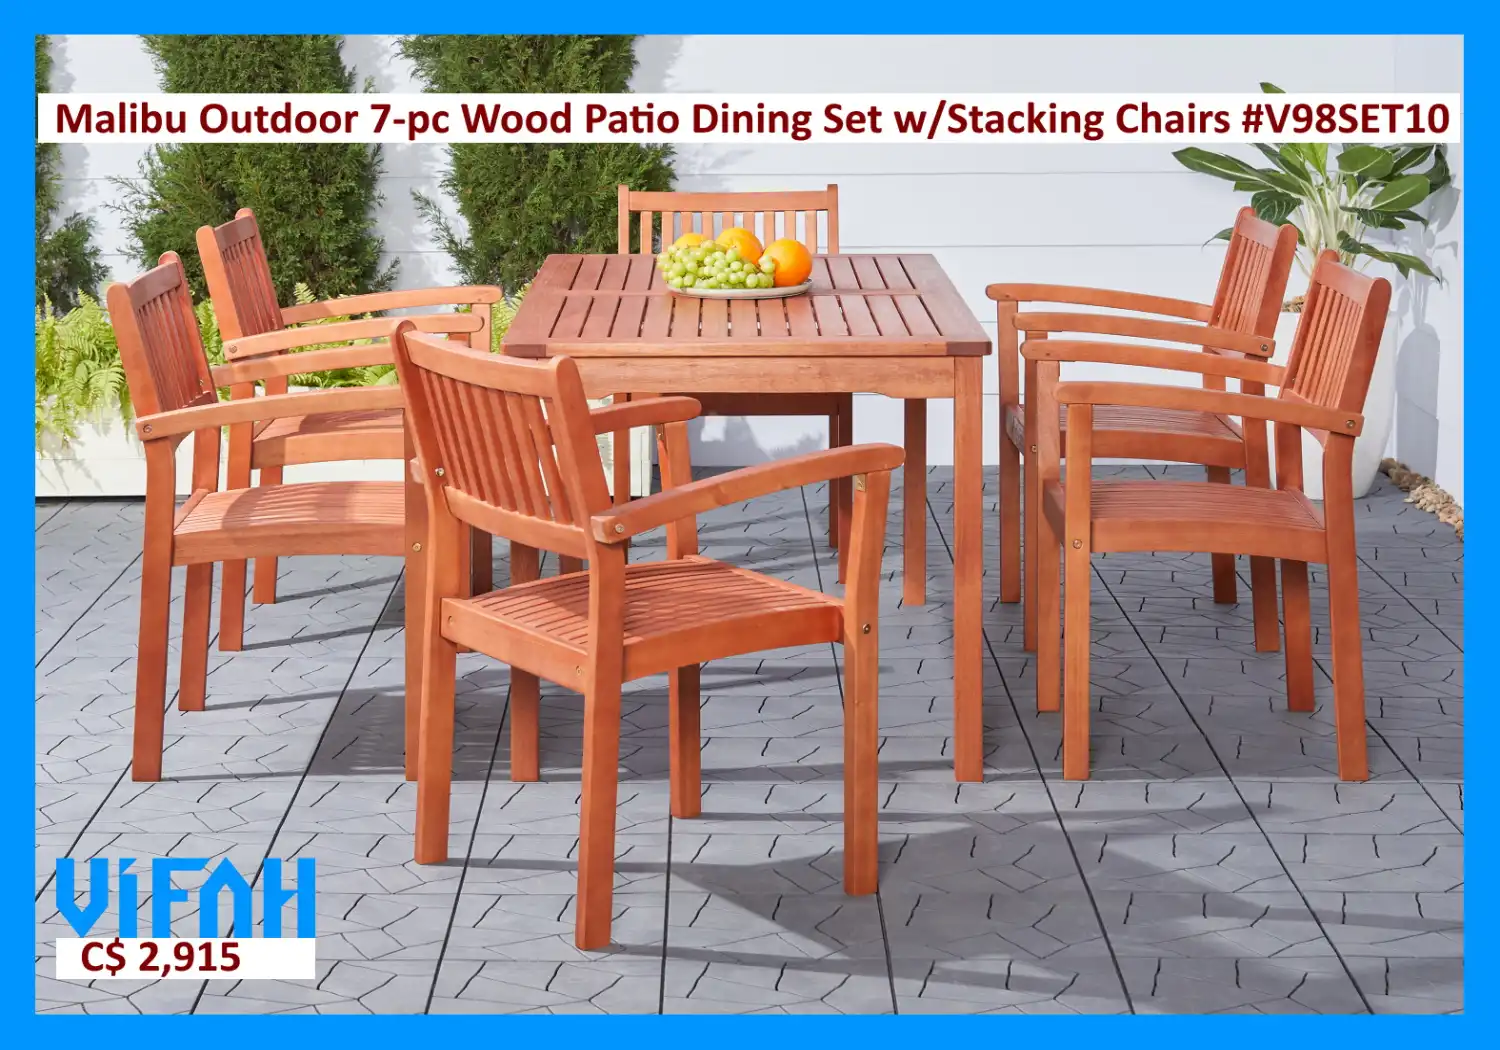 MALIBU Outdoor #V98SET10 7-piece Wood Patio Dining Set with Stacking Chairs